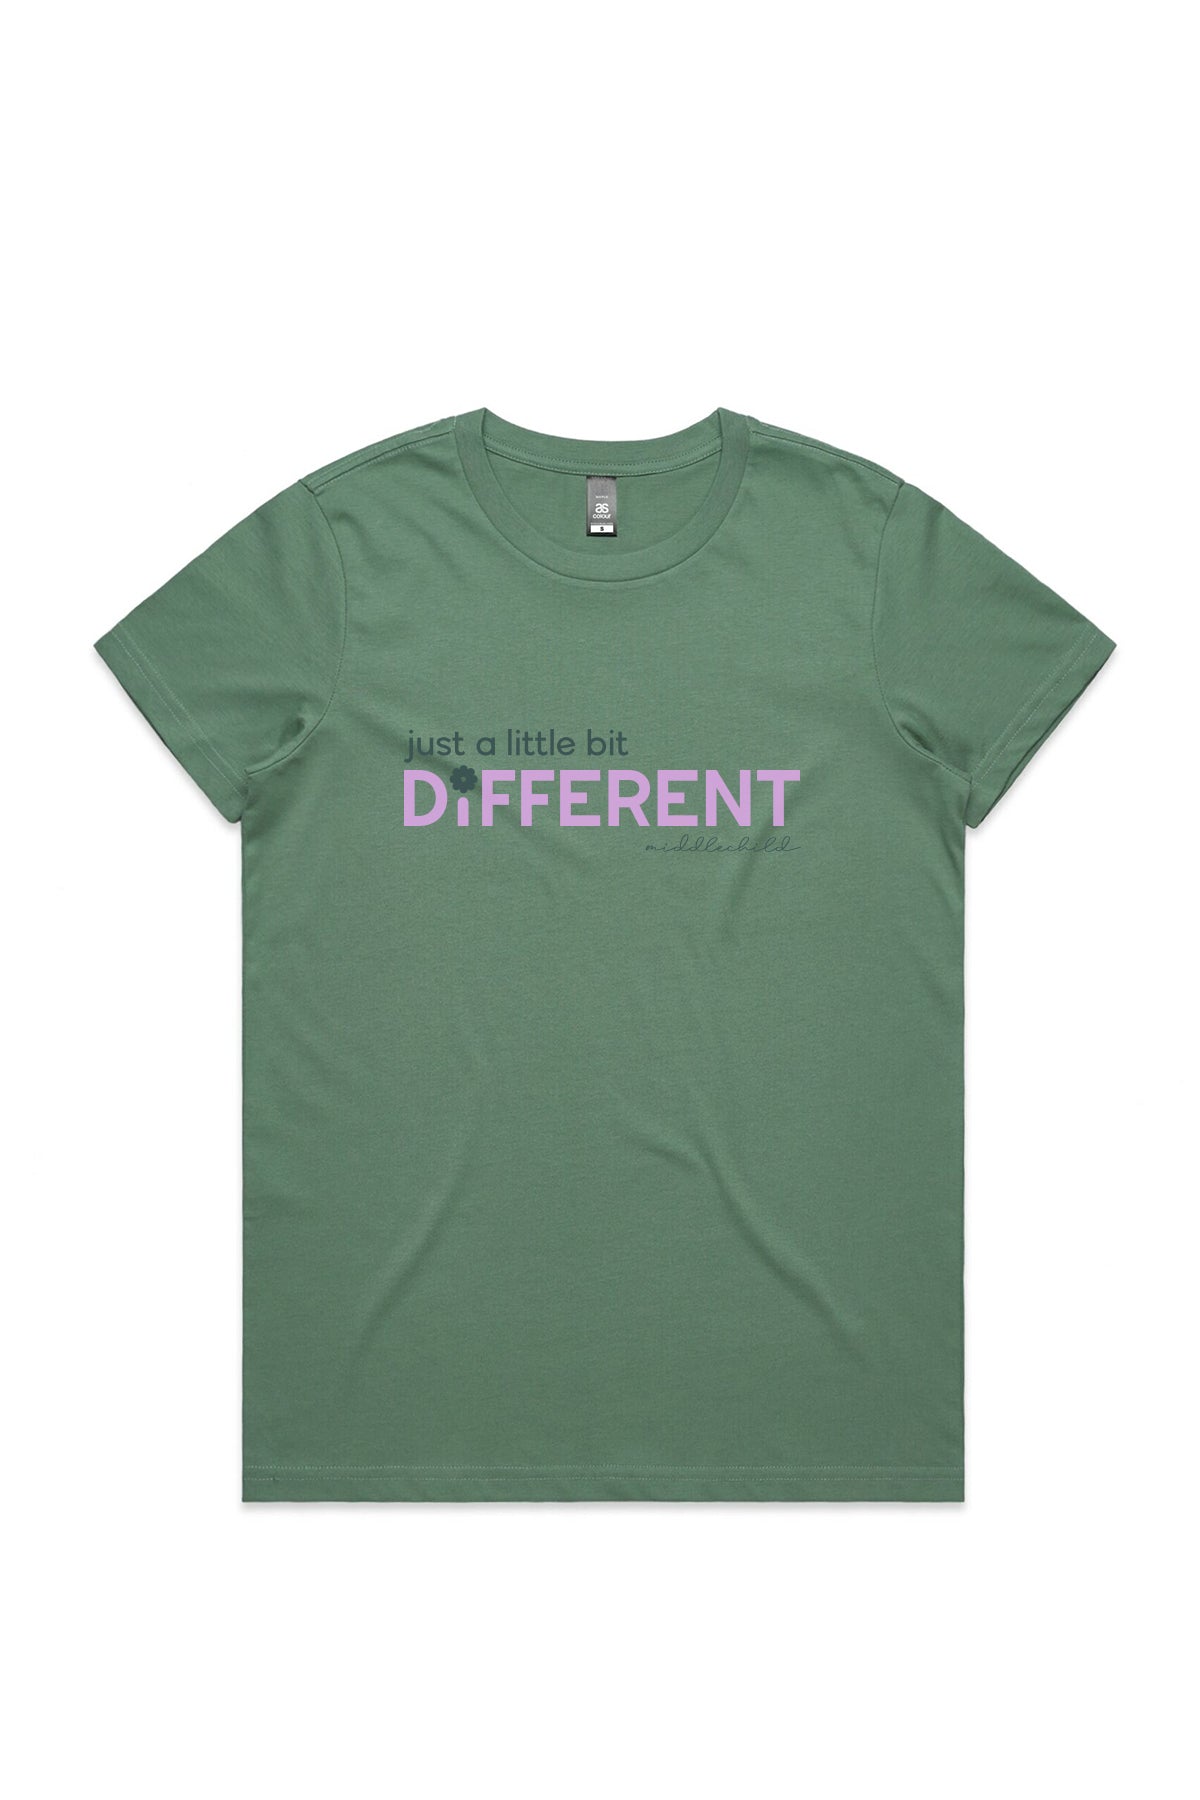 A sage green coloured t-shirt is pictured flat against a white background. The t-shirt has the words just a little bit different written across the chest in a dark green and purple colour, with a daisy shape replacing the dot in the i.